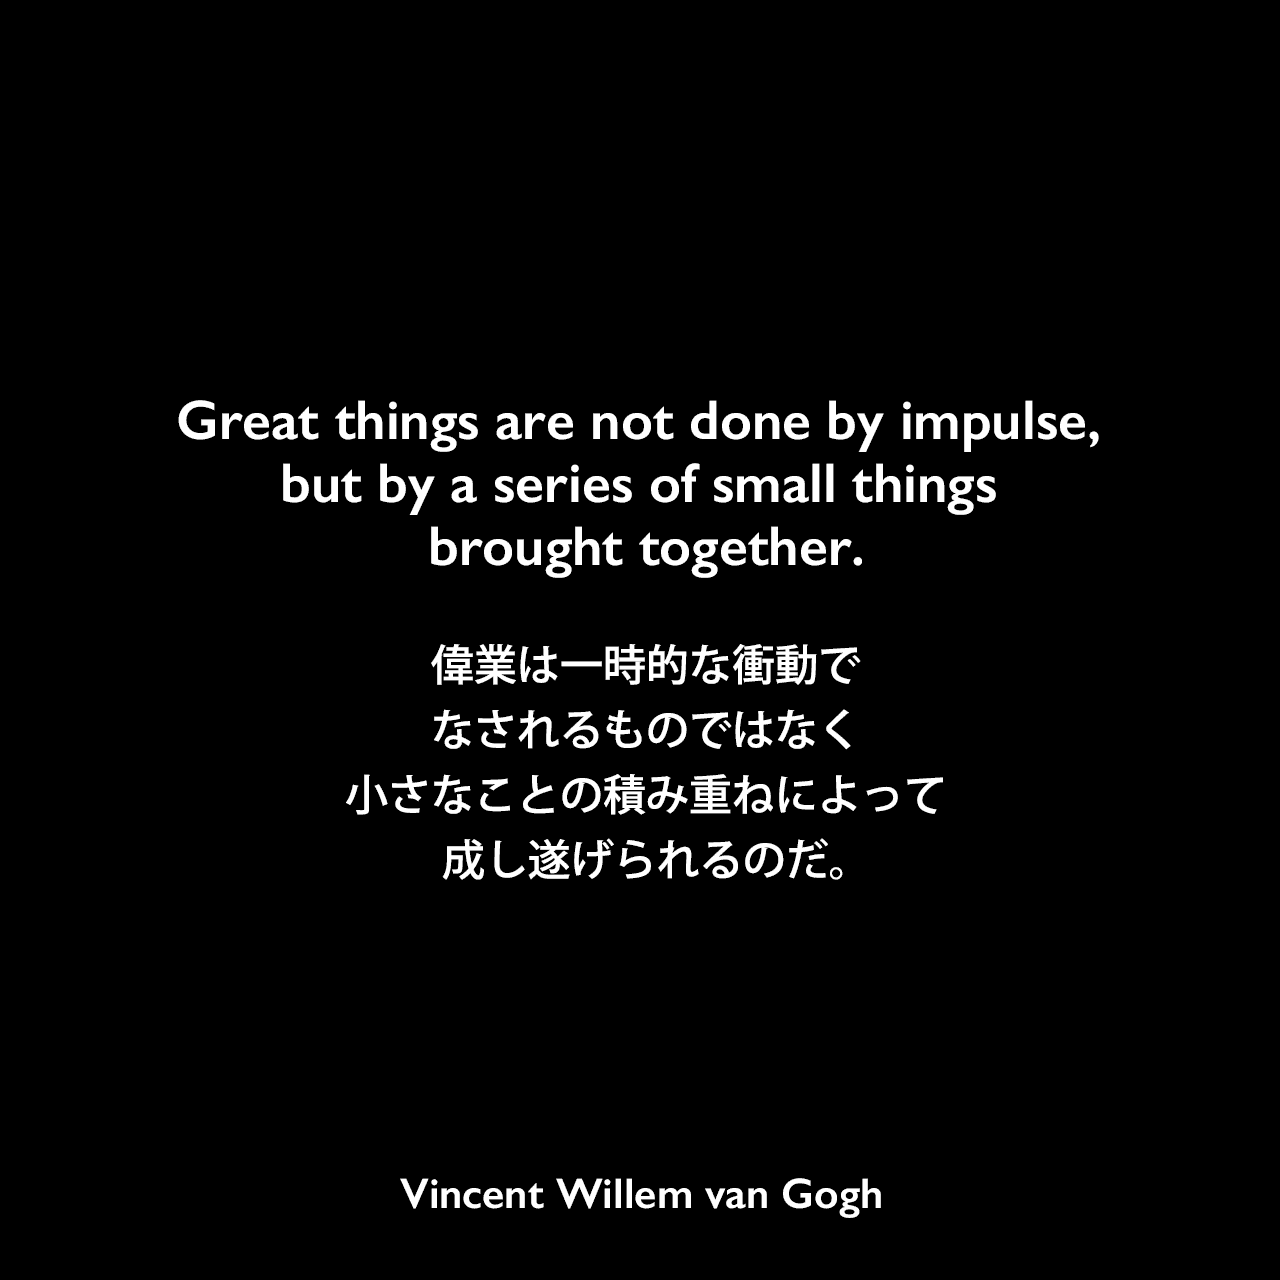 Great things are not done by impulse, but by a series of small things brought together.偉業は一時的な衝動でなされるものではなく、小さなことの積み重ねによって成し遂げられるのだ。- ゴッホの弟テオへ宛てた手紙よりVincent Willem van Gogh